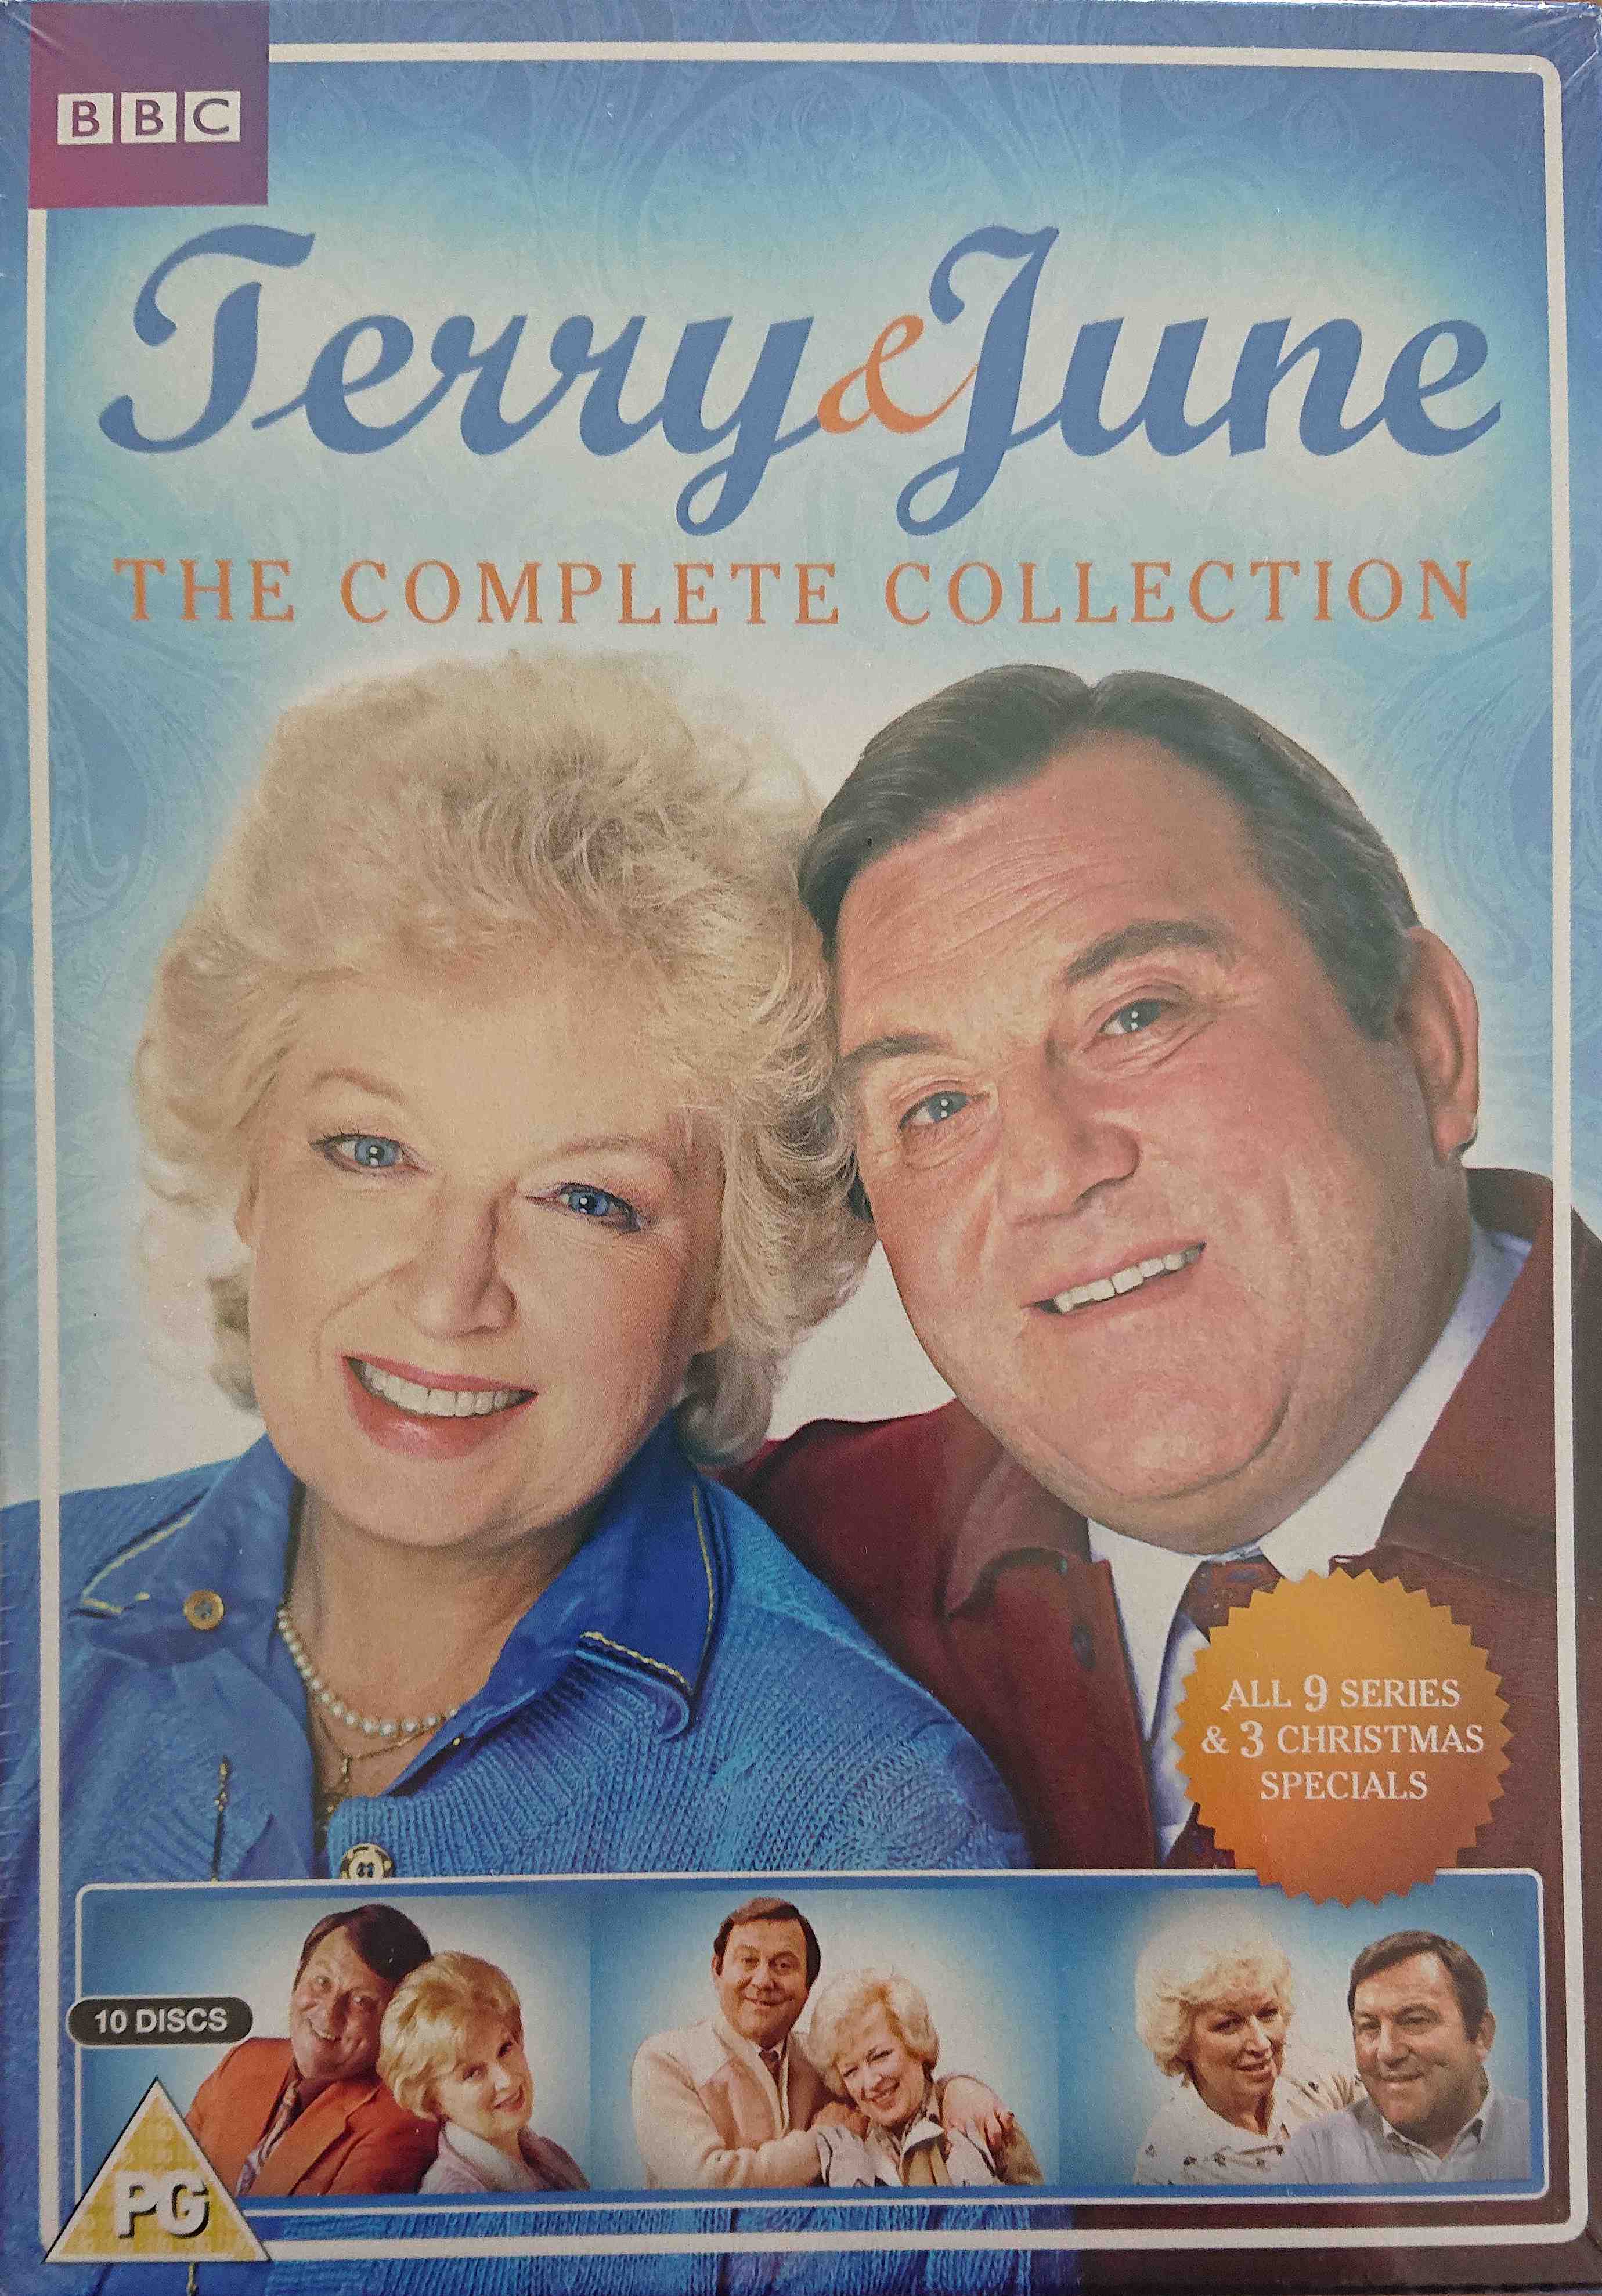 Picture of BBCDVD 4183 Terry & June - The complete collection by artist John Kane / Terry Ravenscroft / John Watkins / Dave Freman / Greg Freeman / Colin Bostock Smith from the BBC dvds - Records and Tapes library